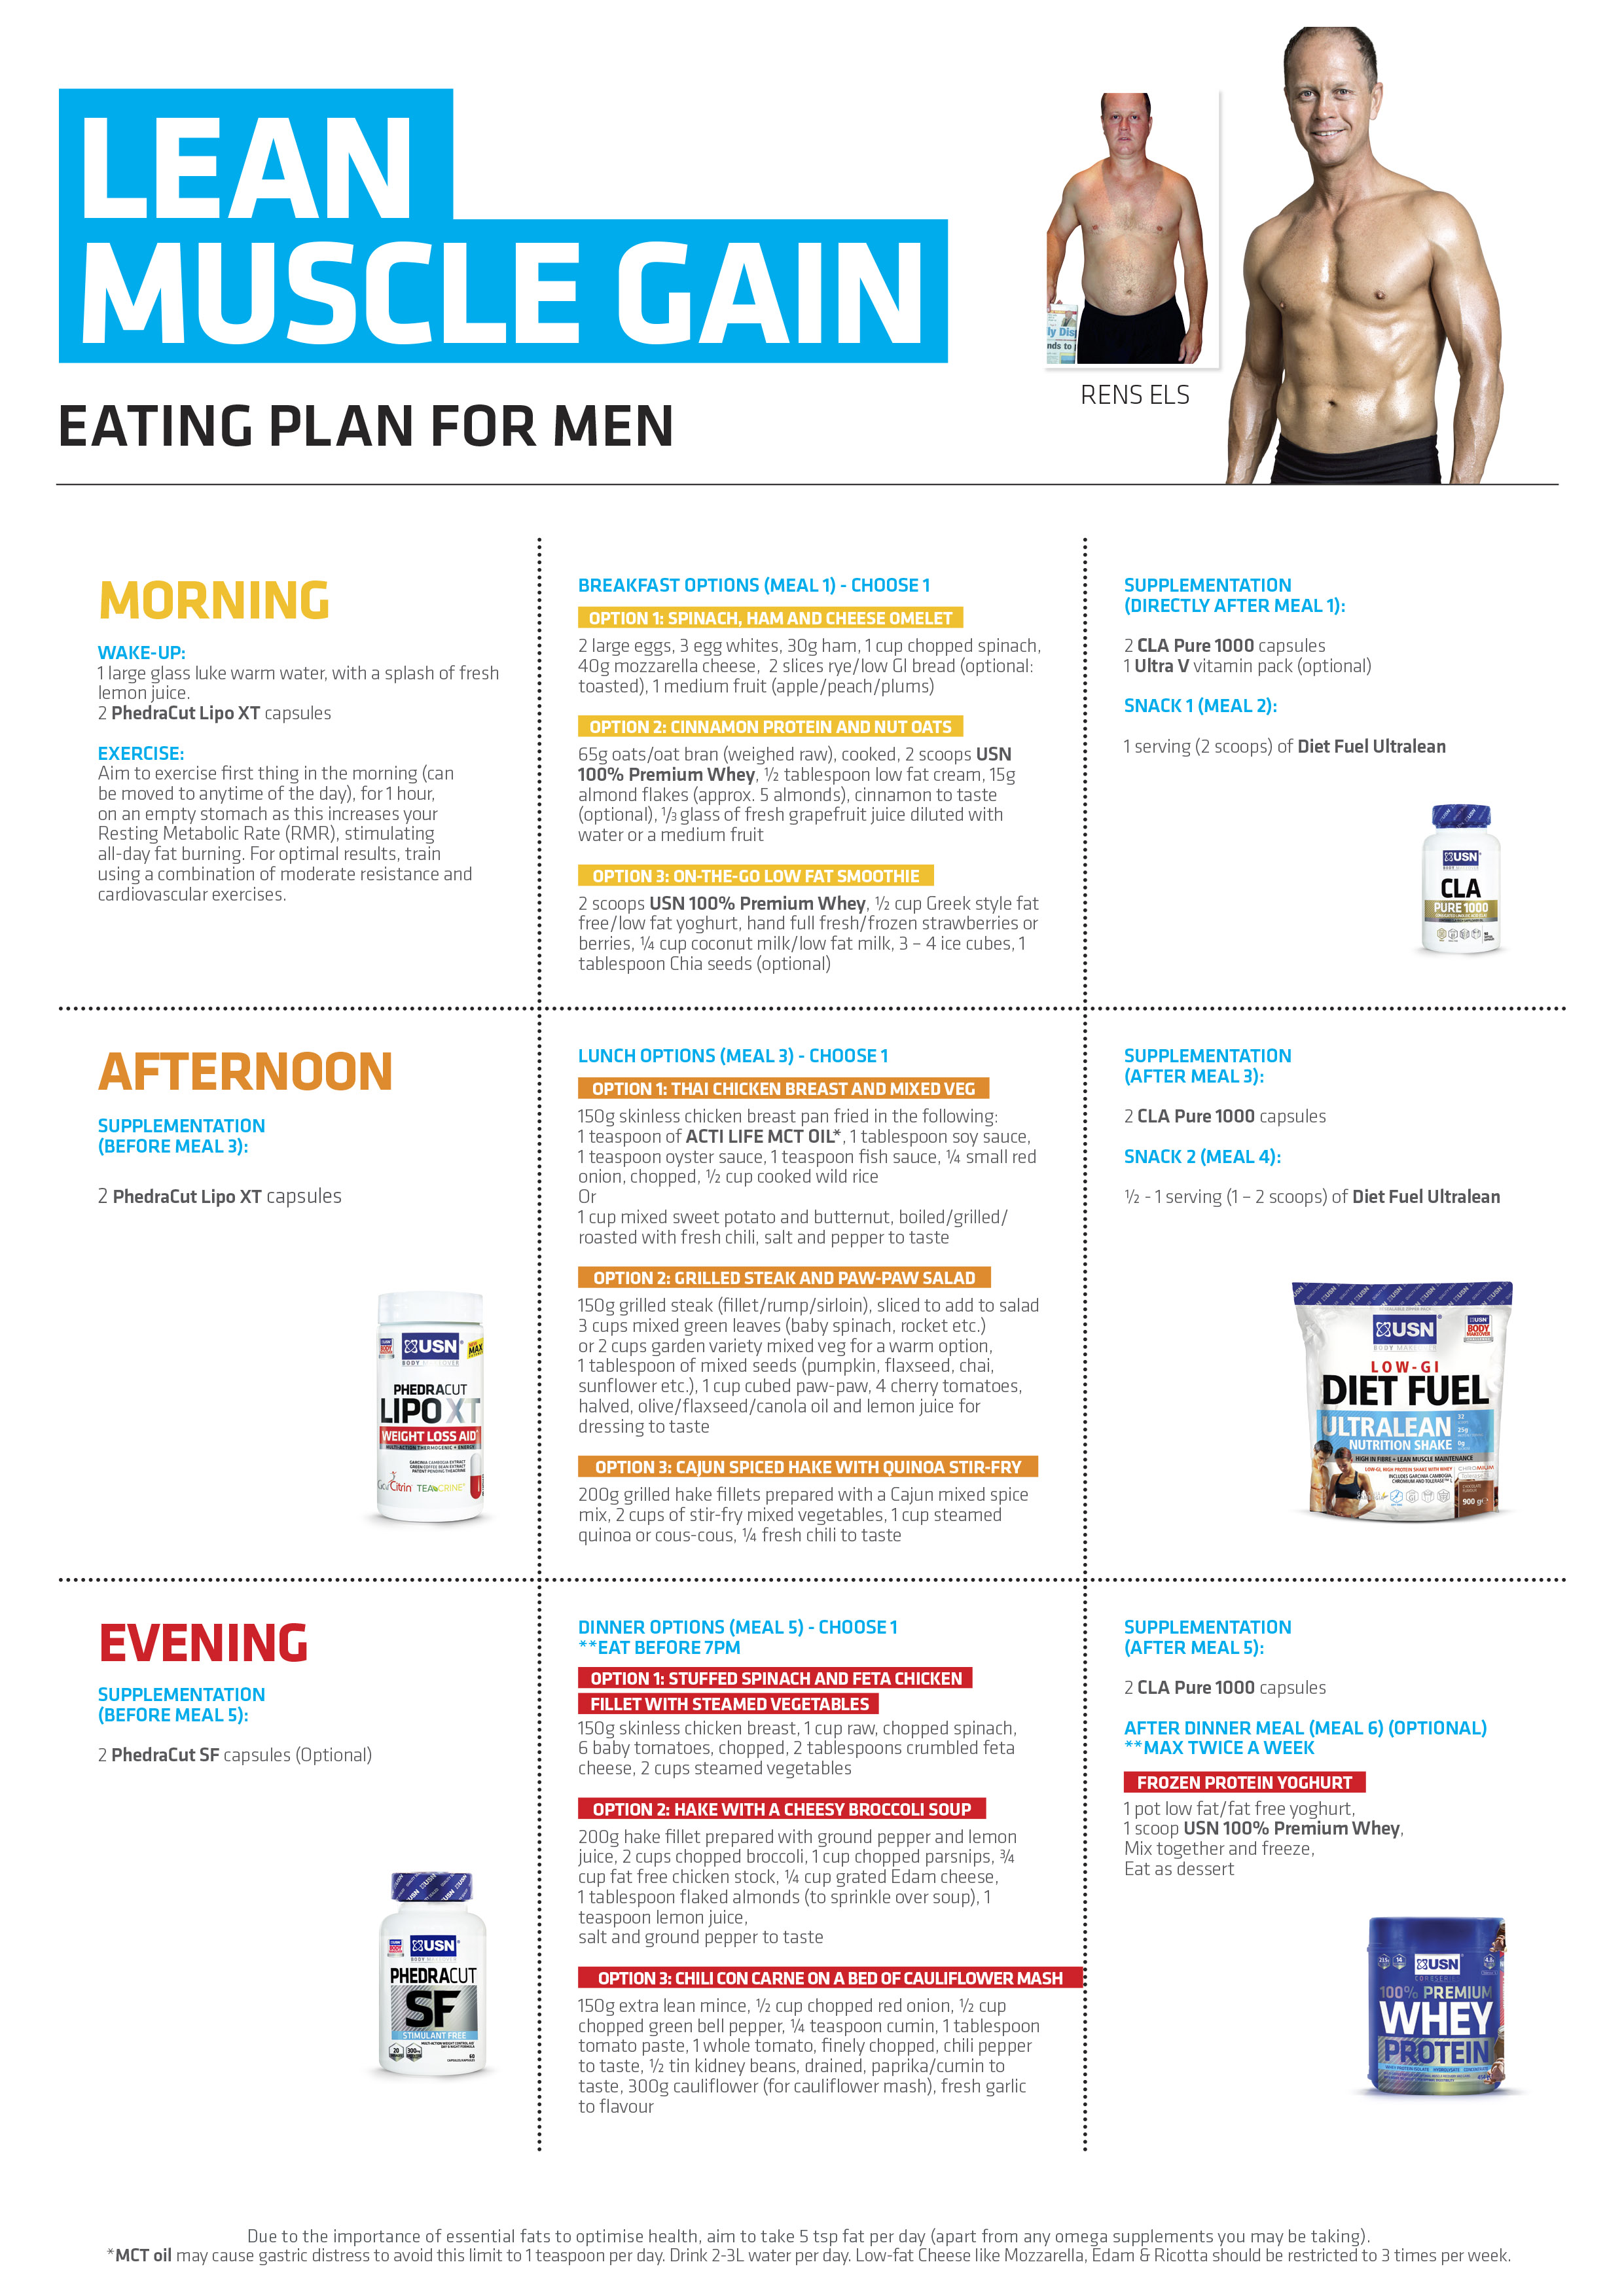 Lean Muscle Gain Eating Plan For Men | Lifestylechallenges